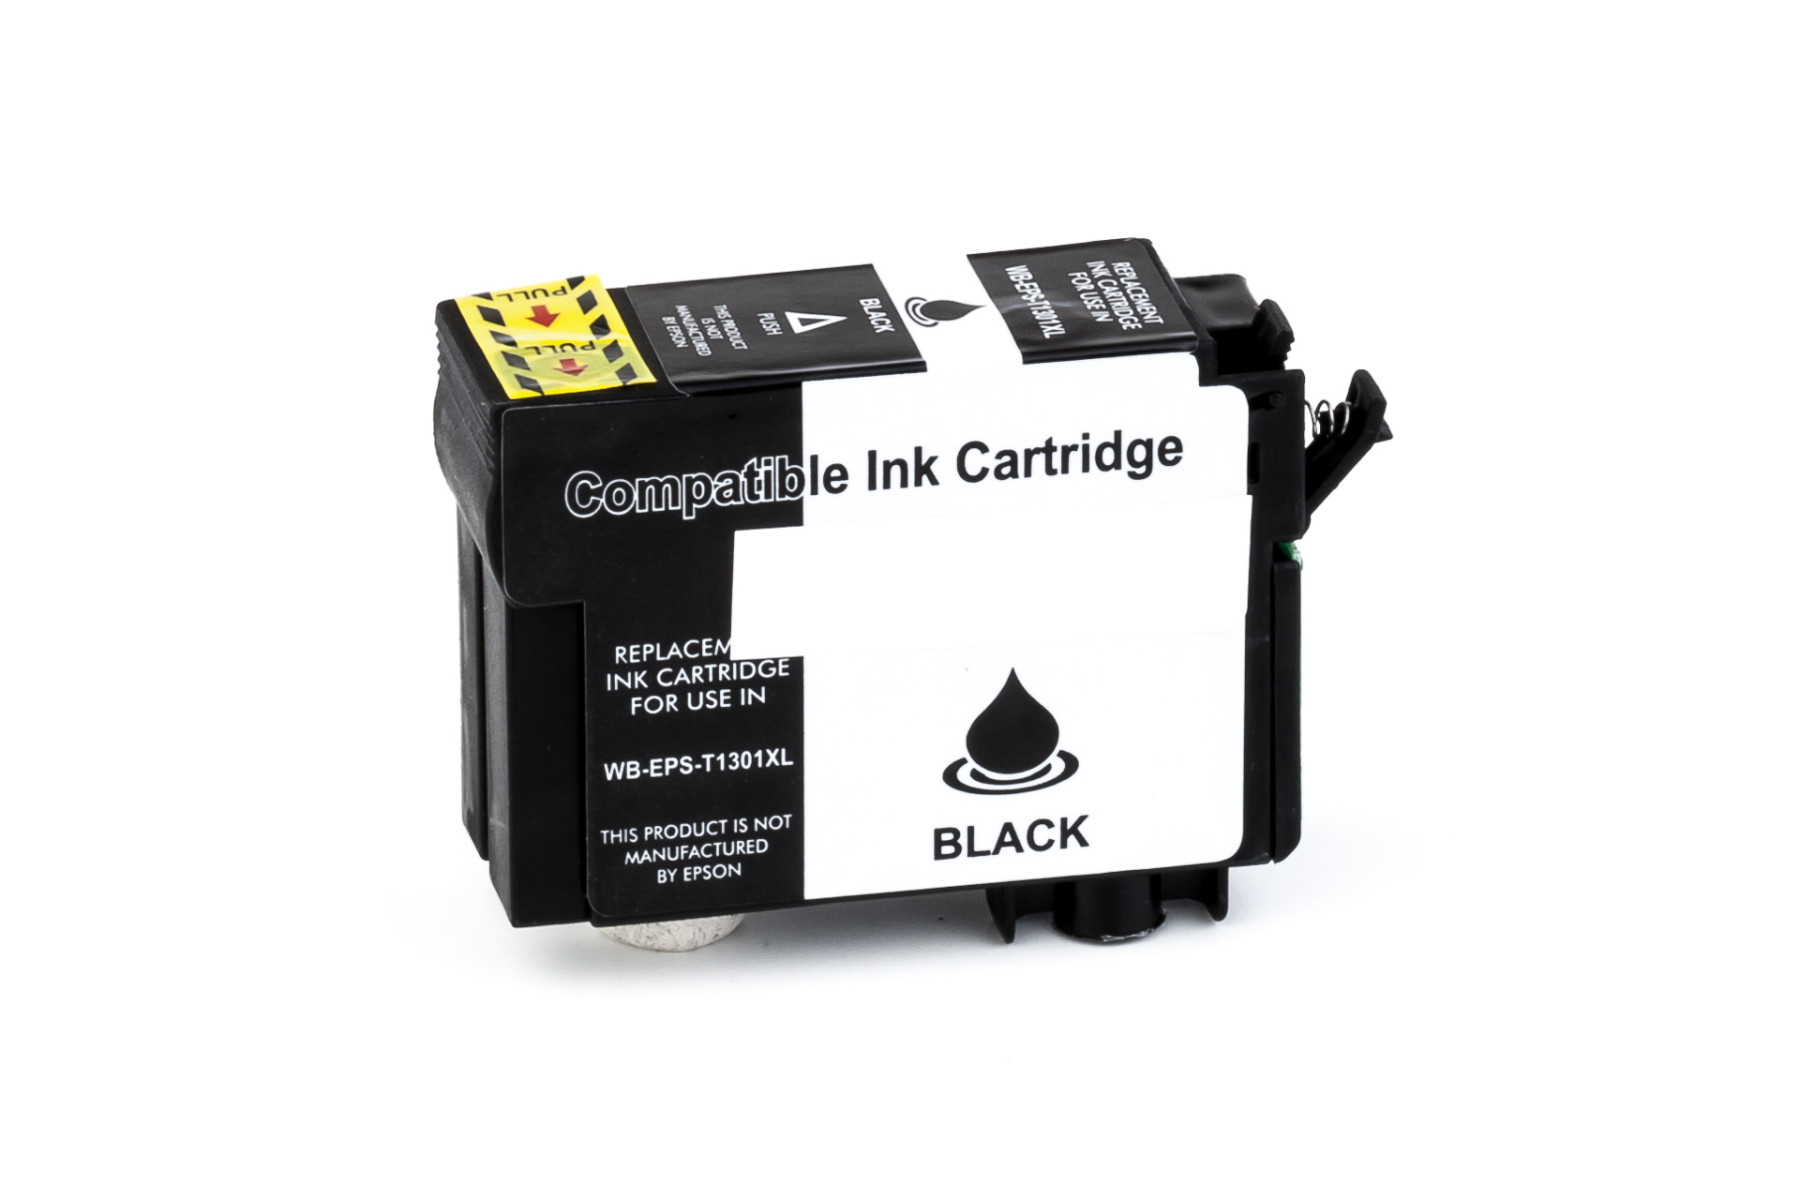 Set consisting of Ink cartridge (alternative) compatible with Epson - T130140 - Stylus Office B 42 WD / BX 525 WD / 535 WD / 625 FWD / 630 FWD / 635 FWD / 925 FWD / 935 FWD / Stylus SX 525 WD / 535 WD / 620 FW ff. black, T130240 - Stylus Office B 42 WD / 